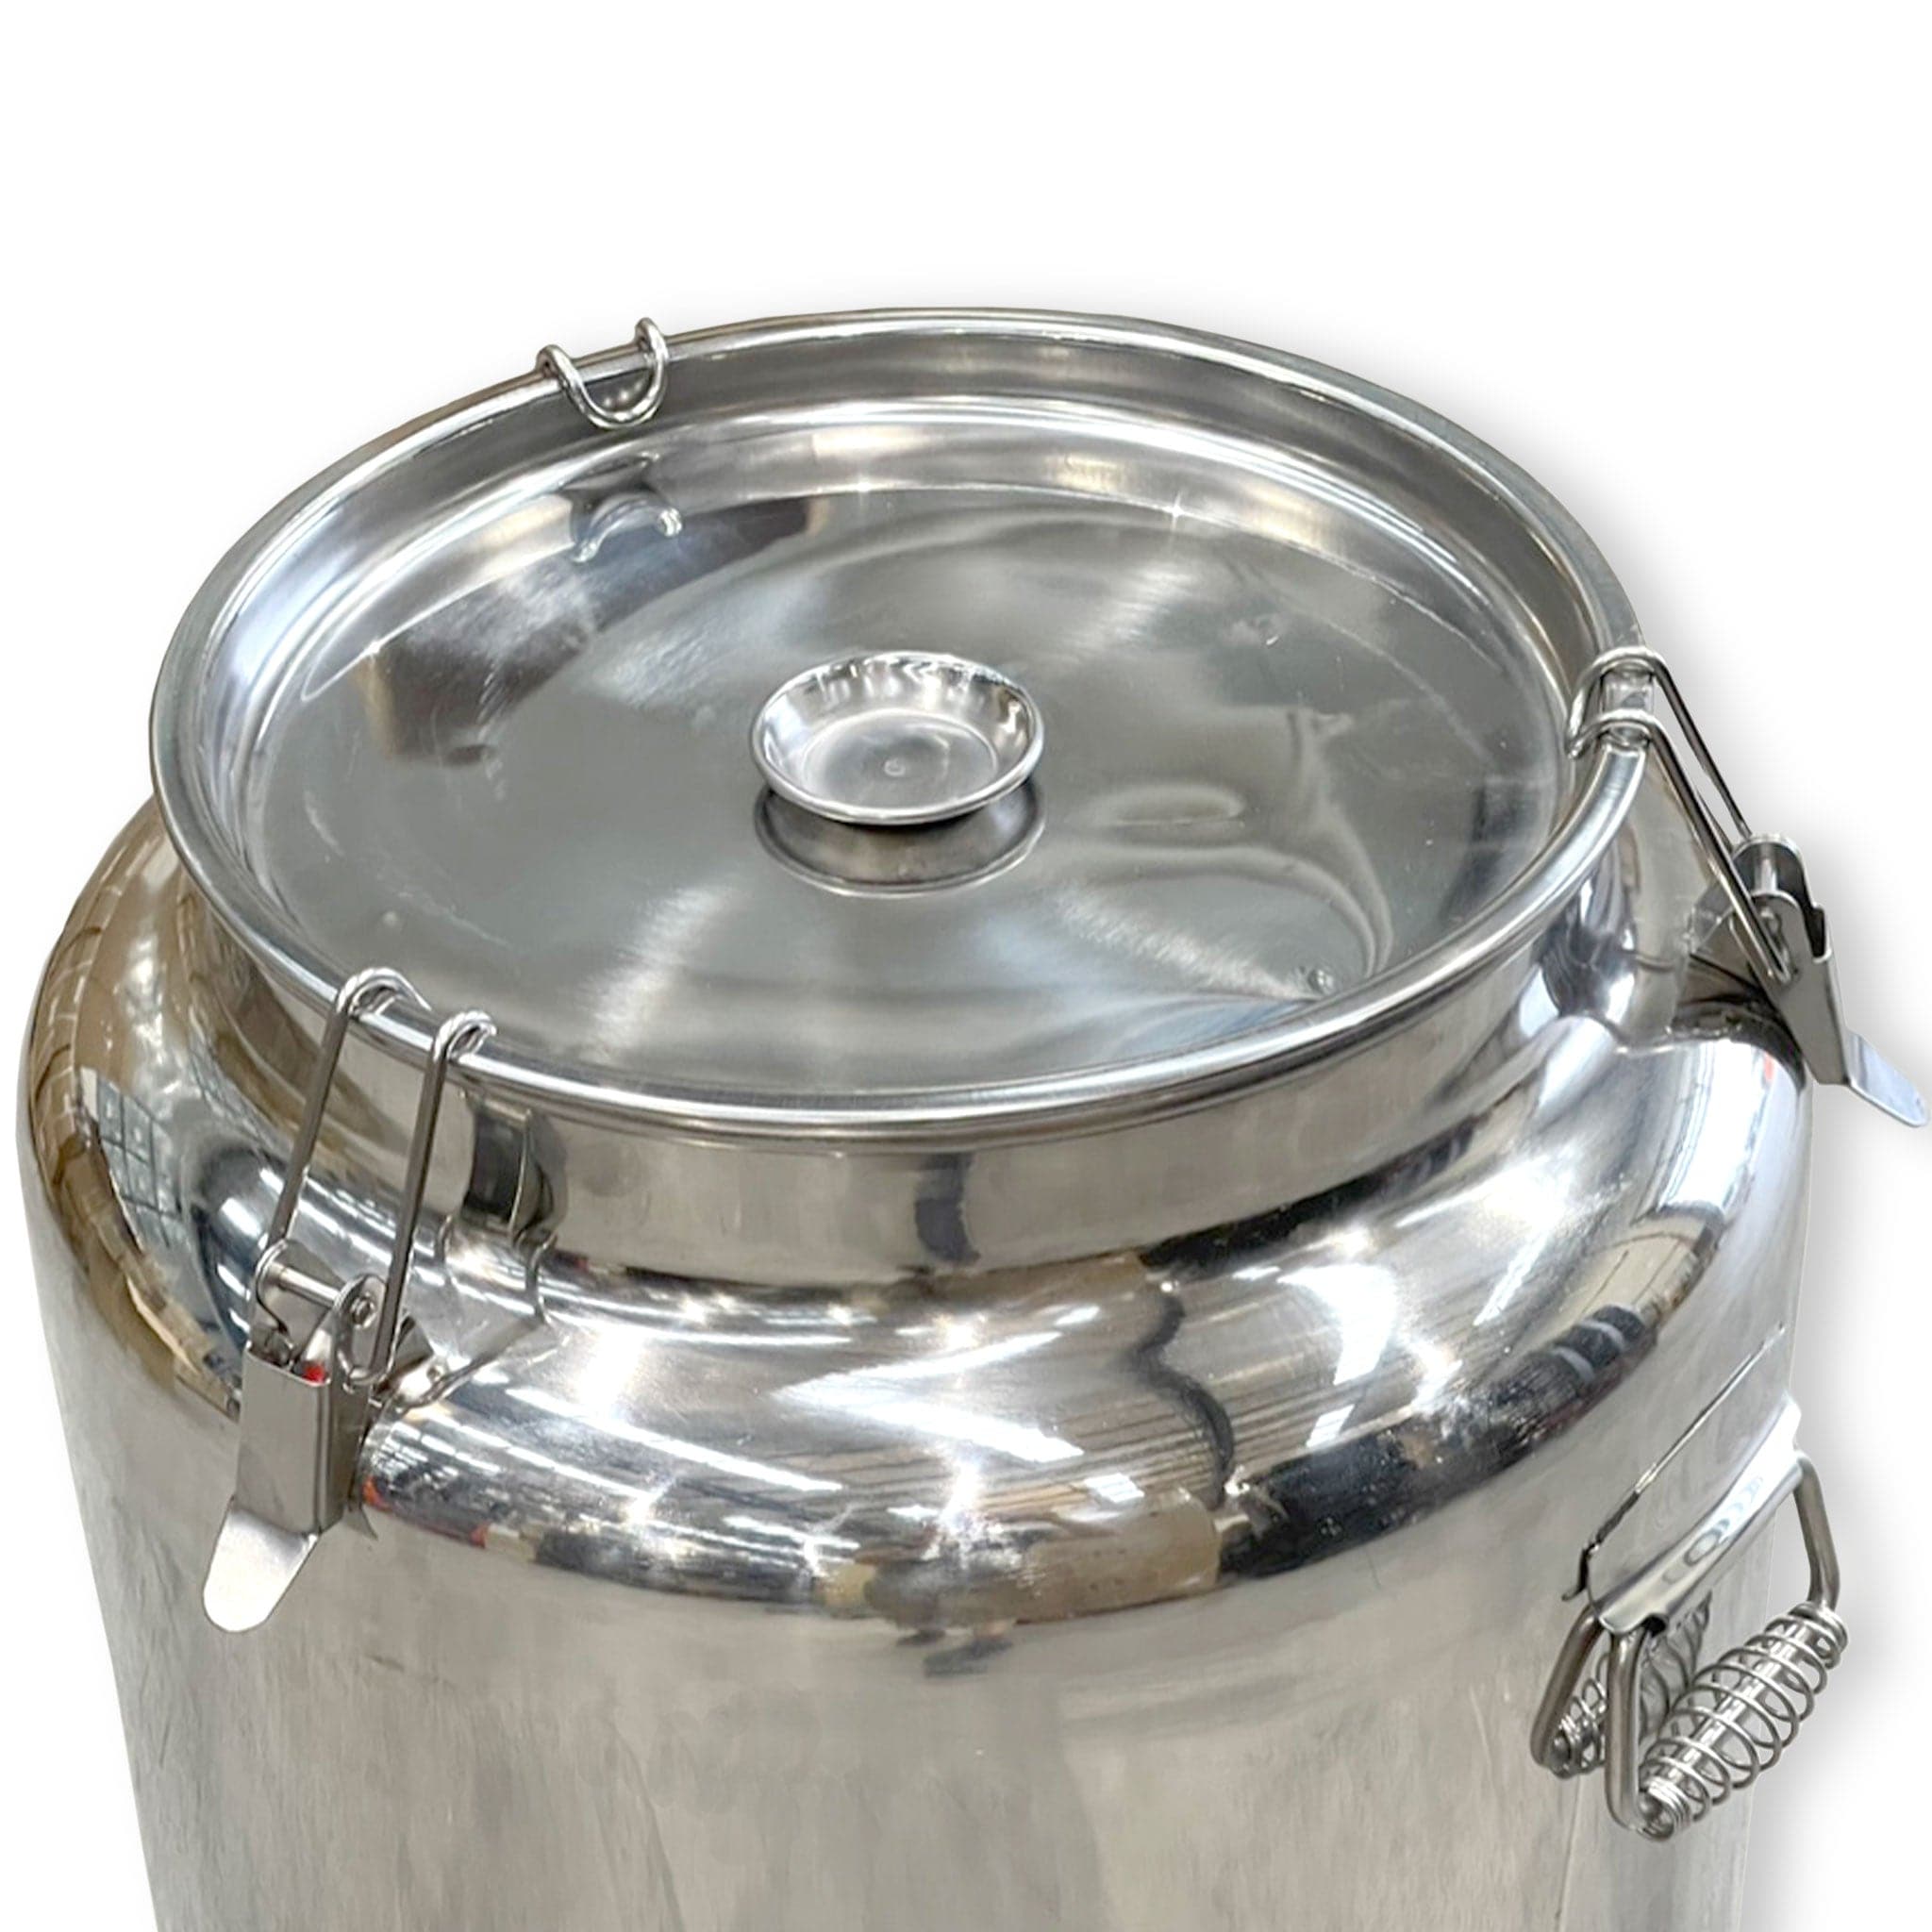 Honey Tank with heater - Stainless Steel - 80L - Processing collection by Buzzbee Beekeeping Supplies